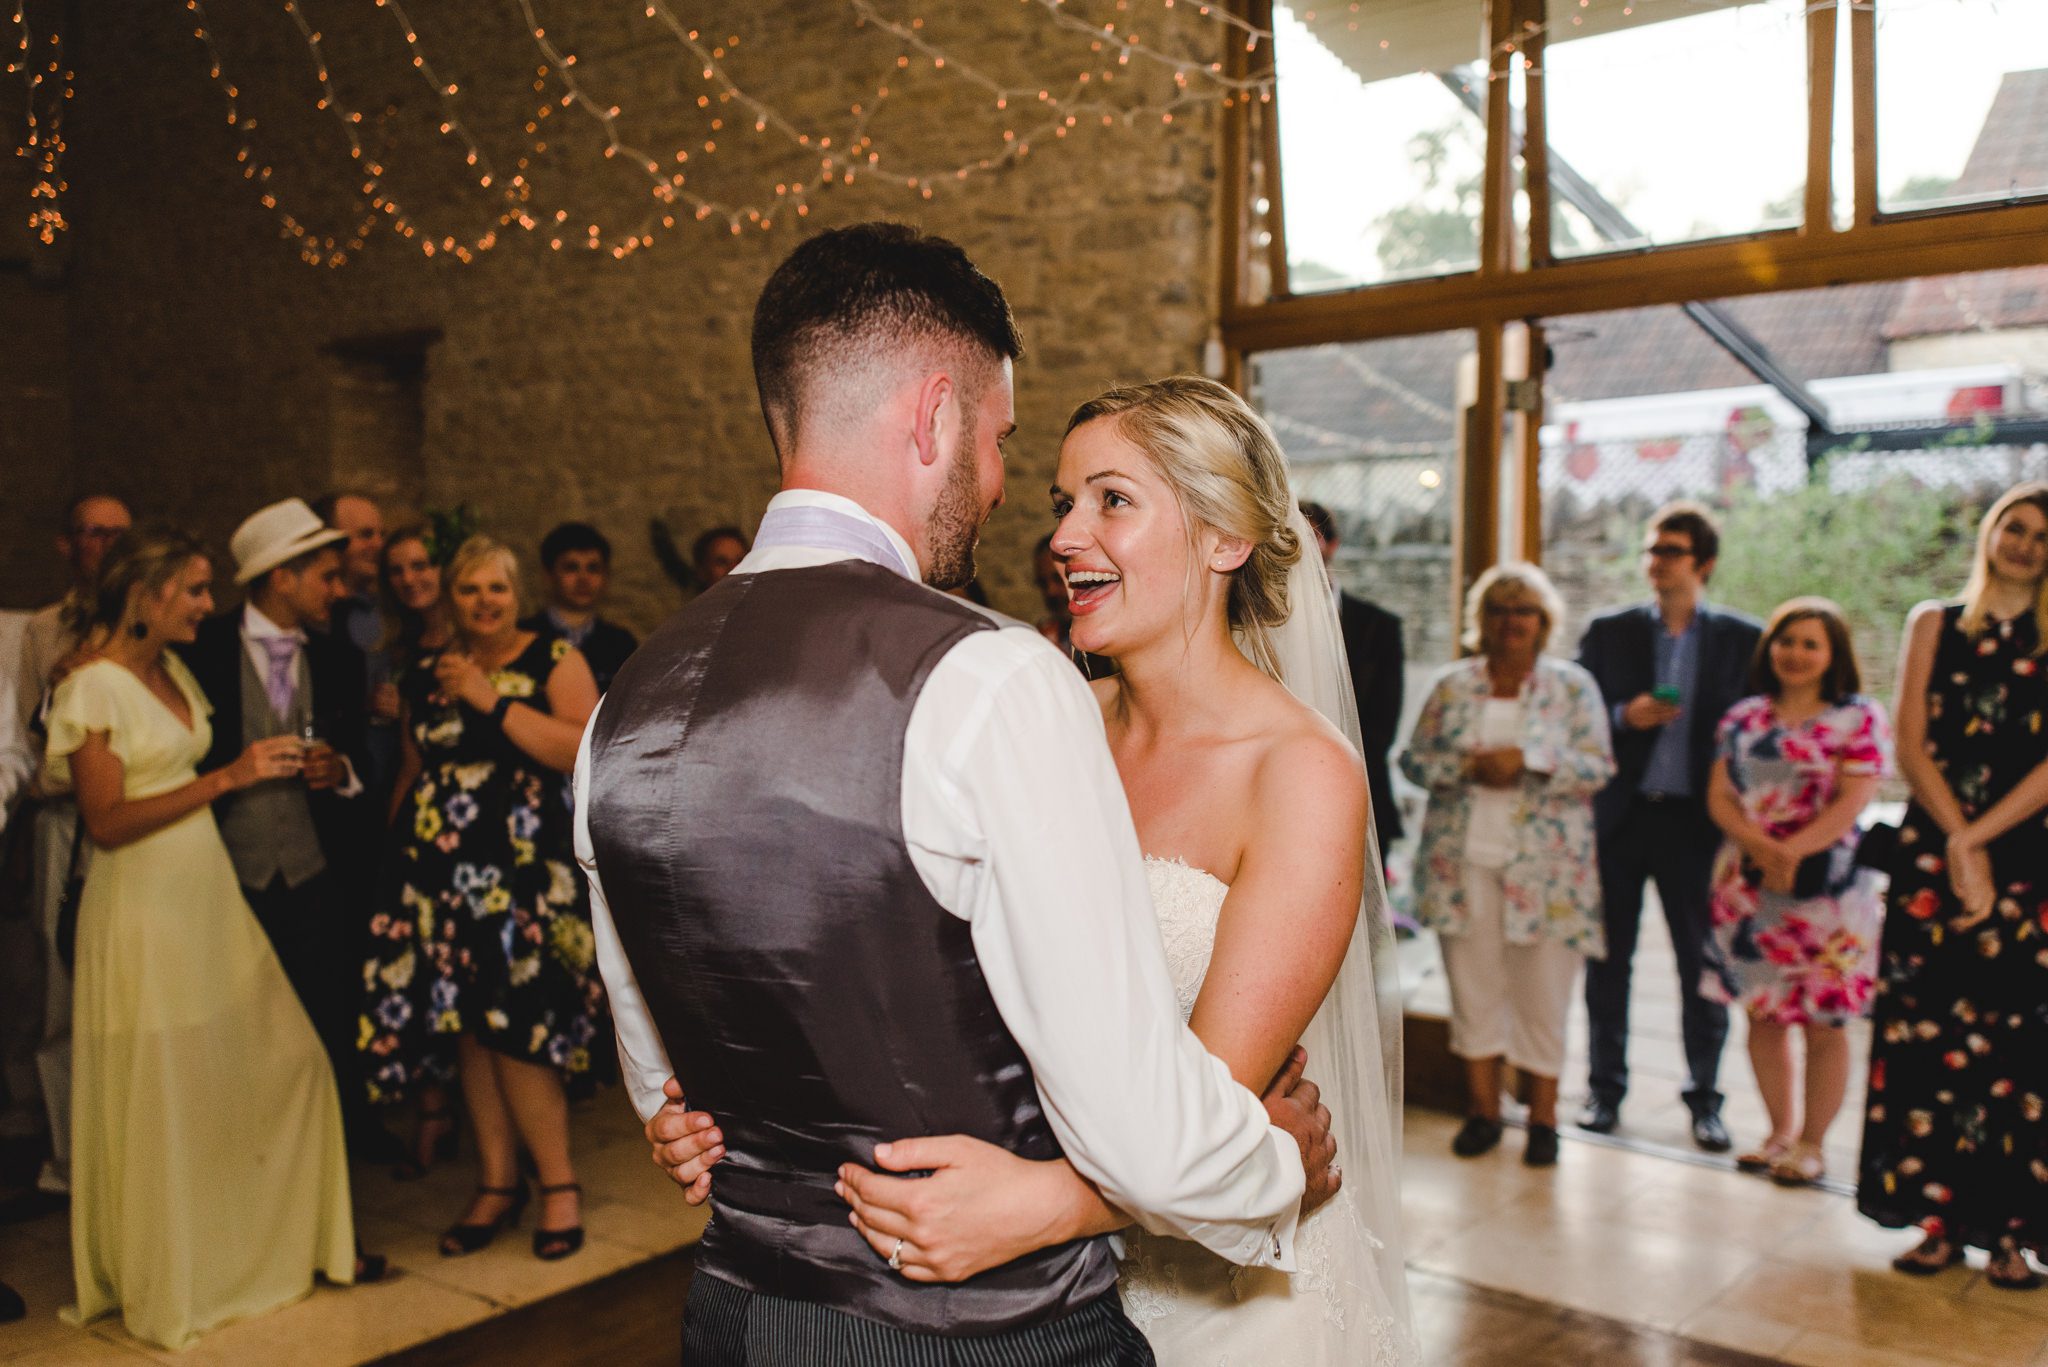 First dance at Kingscote Barn wedding venue in the Cotswolds